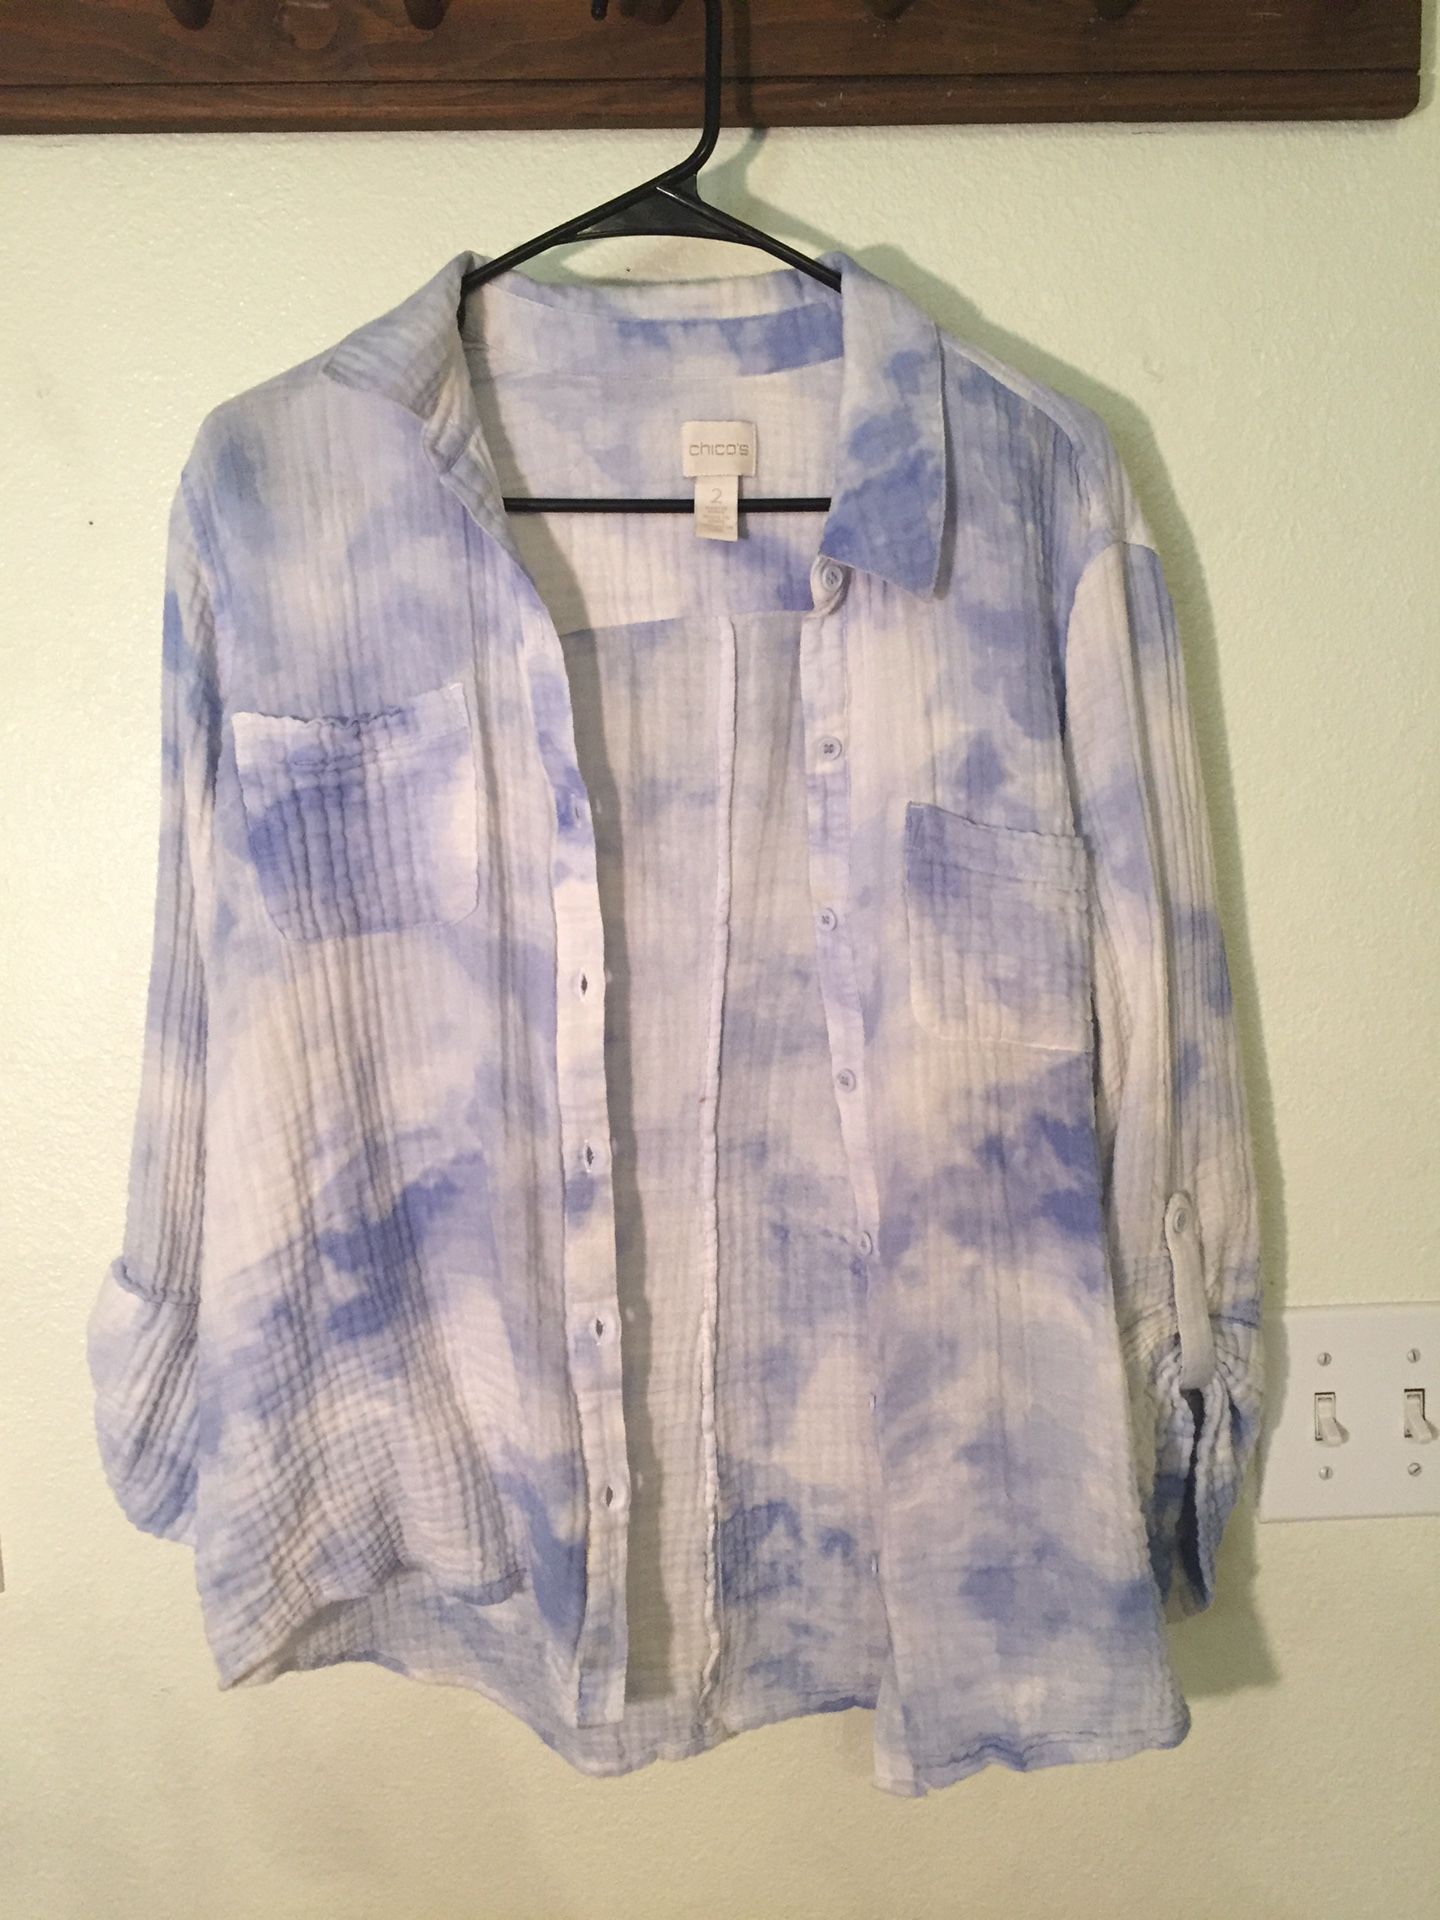 Chico’s blue and white long sleeved collared shirt